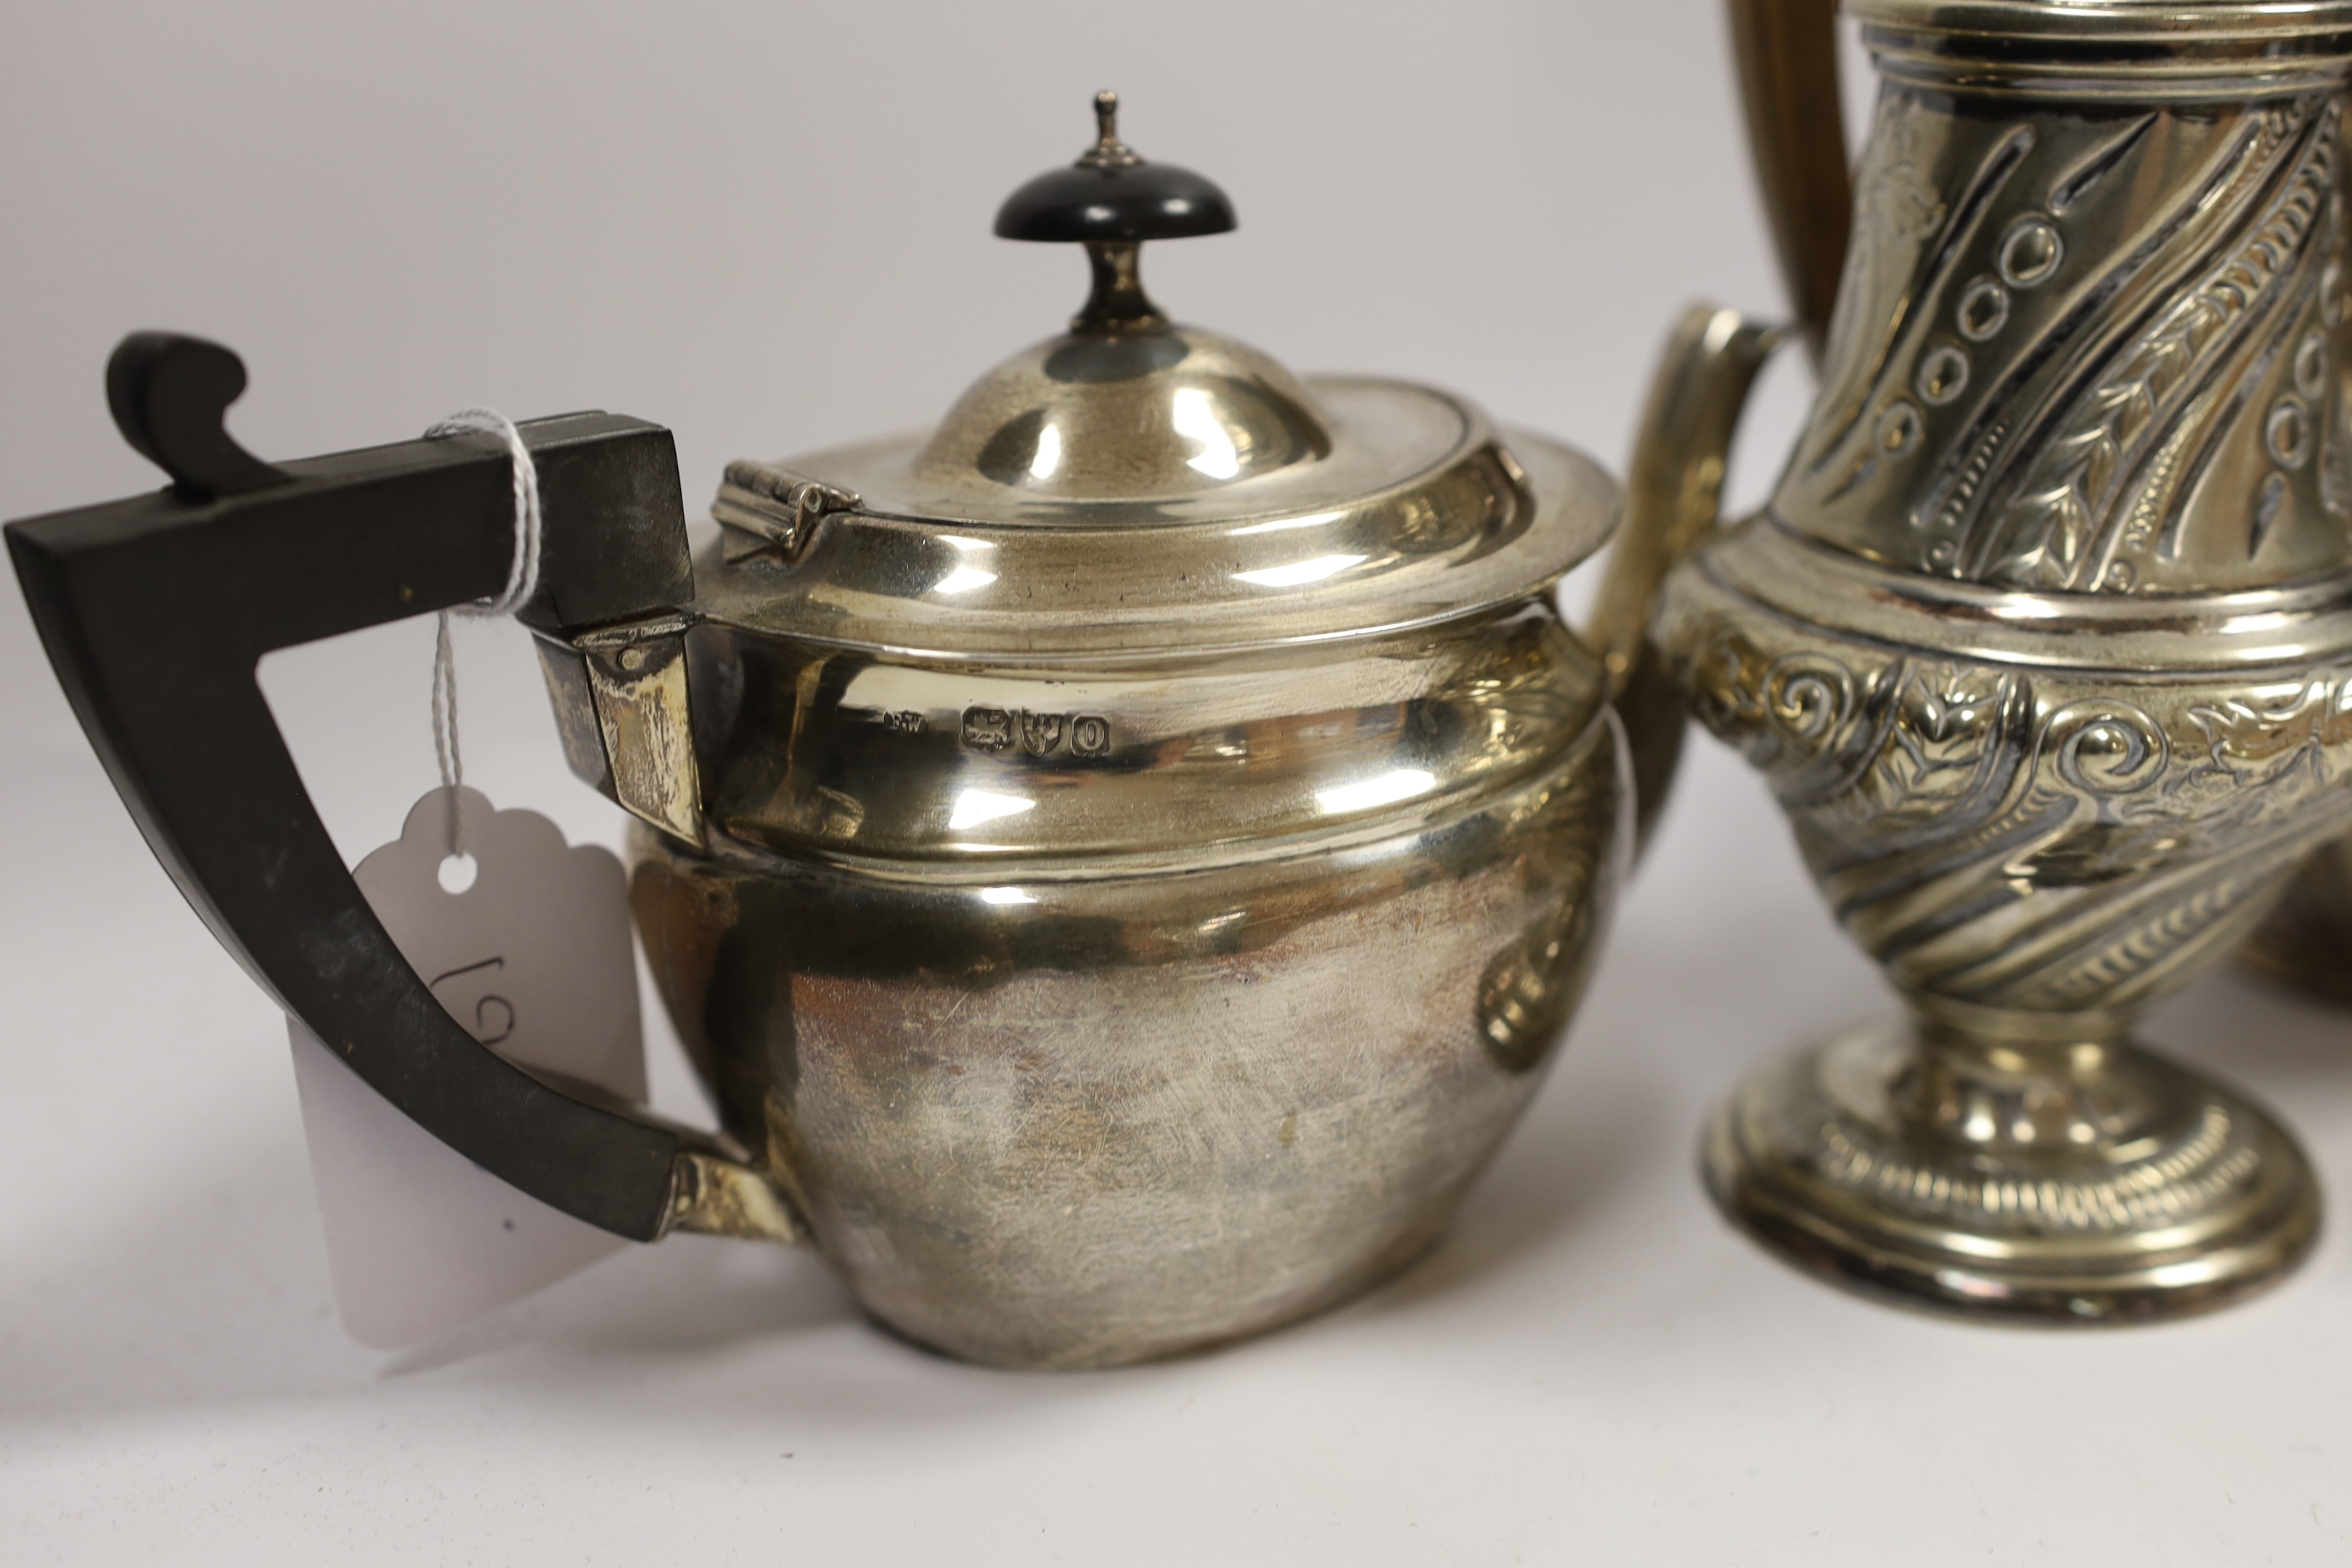 A late Victorian silver bachelor's oval teapot, Florence Warden, Chester, 1897, together with a small Edwardian silver sauceboat and four items of plated ware including a sugar caster and teapot